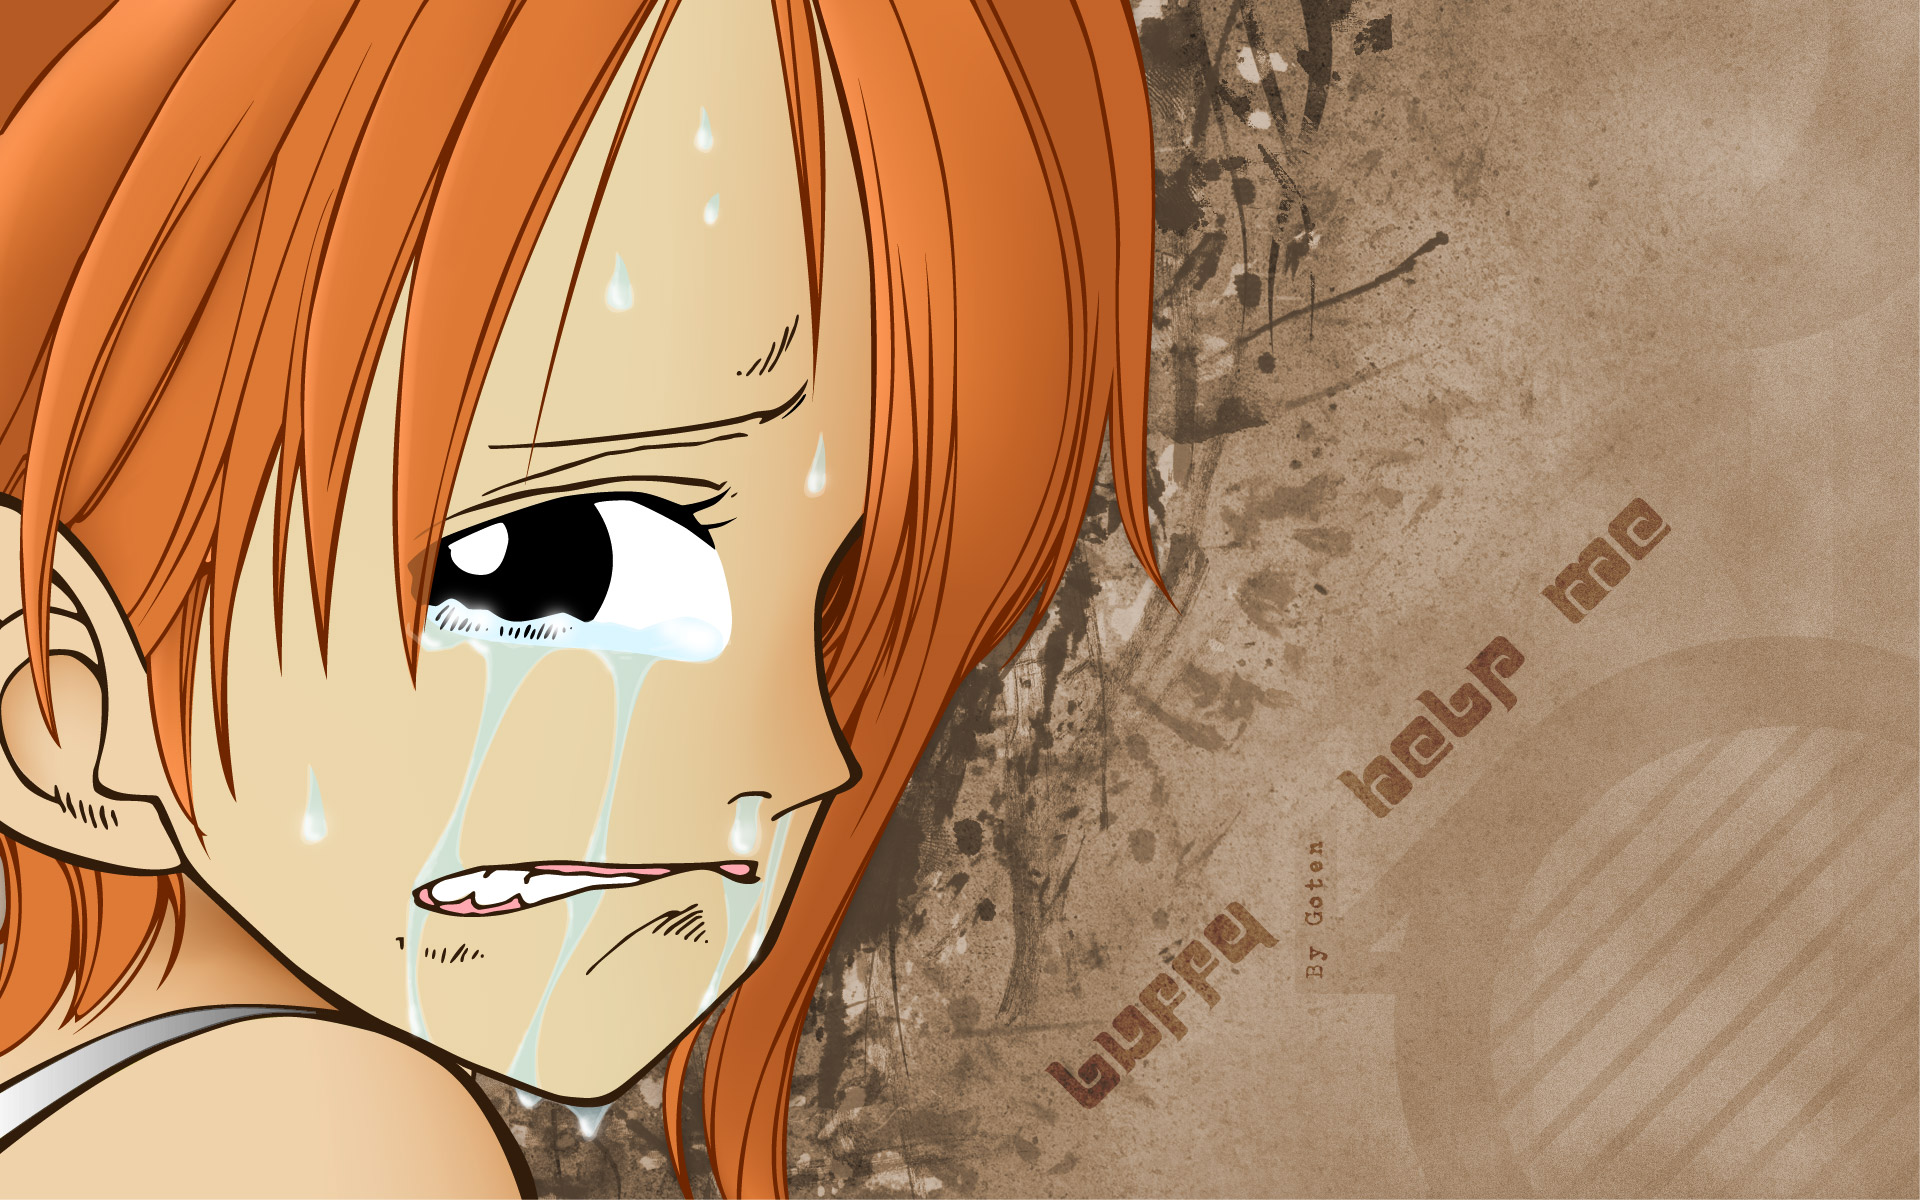 Nami from One Piece in a vibrant anime artwork, perfect for desktop wallpaper.